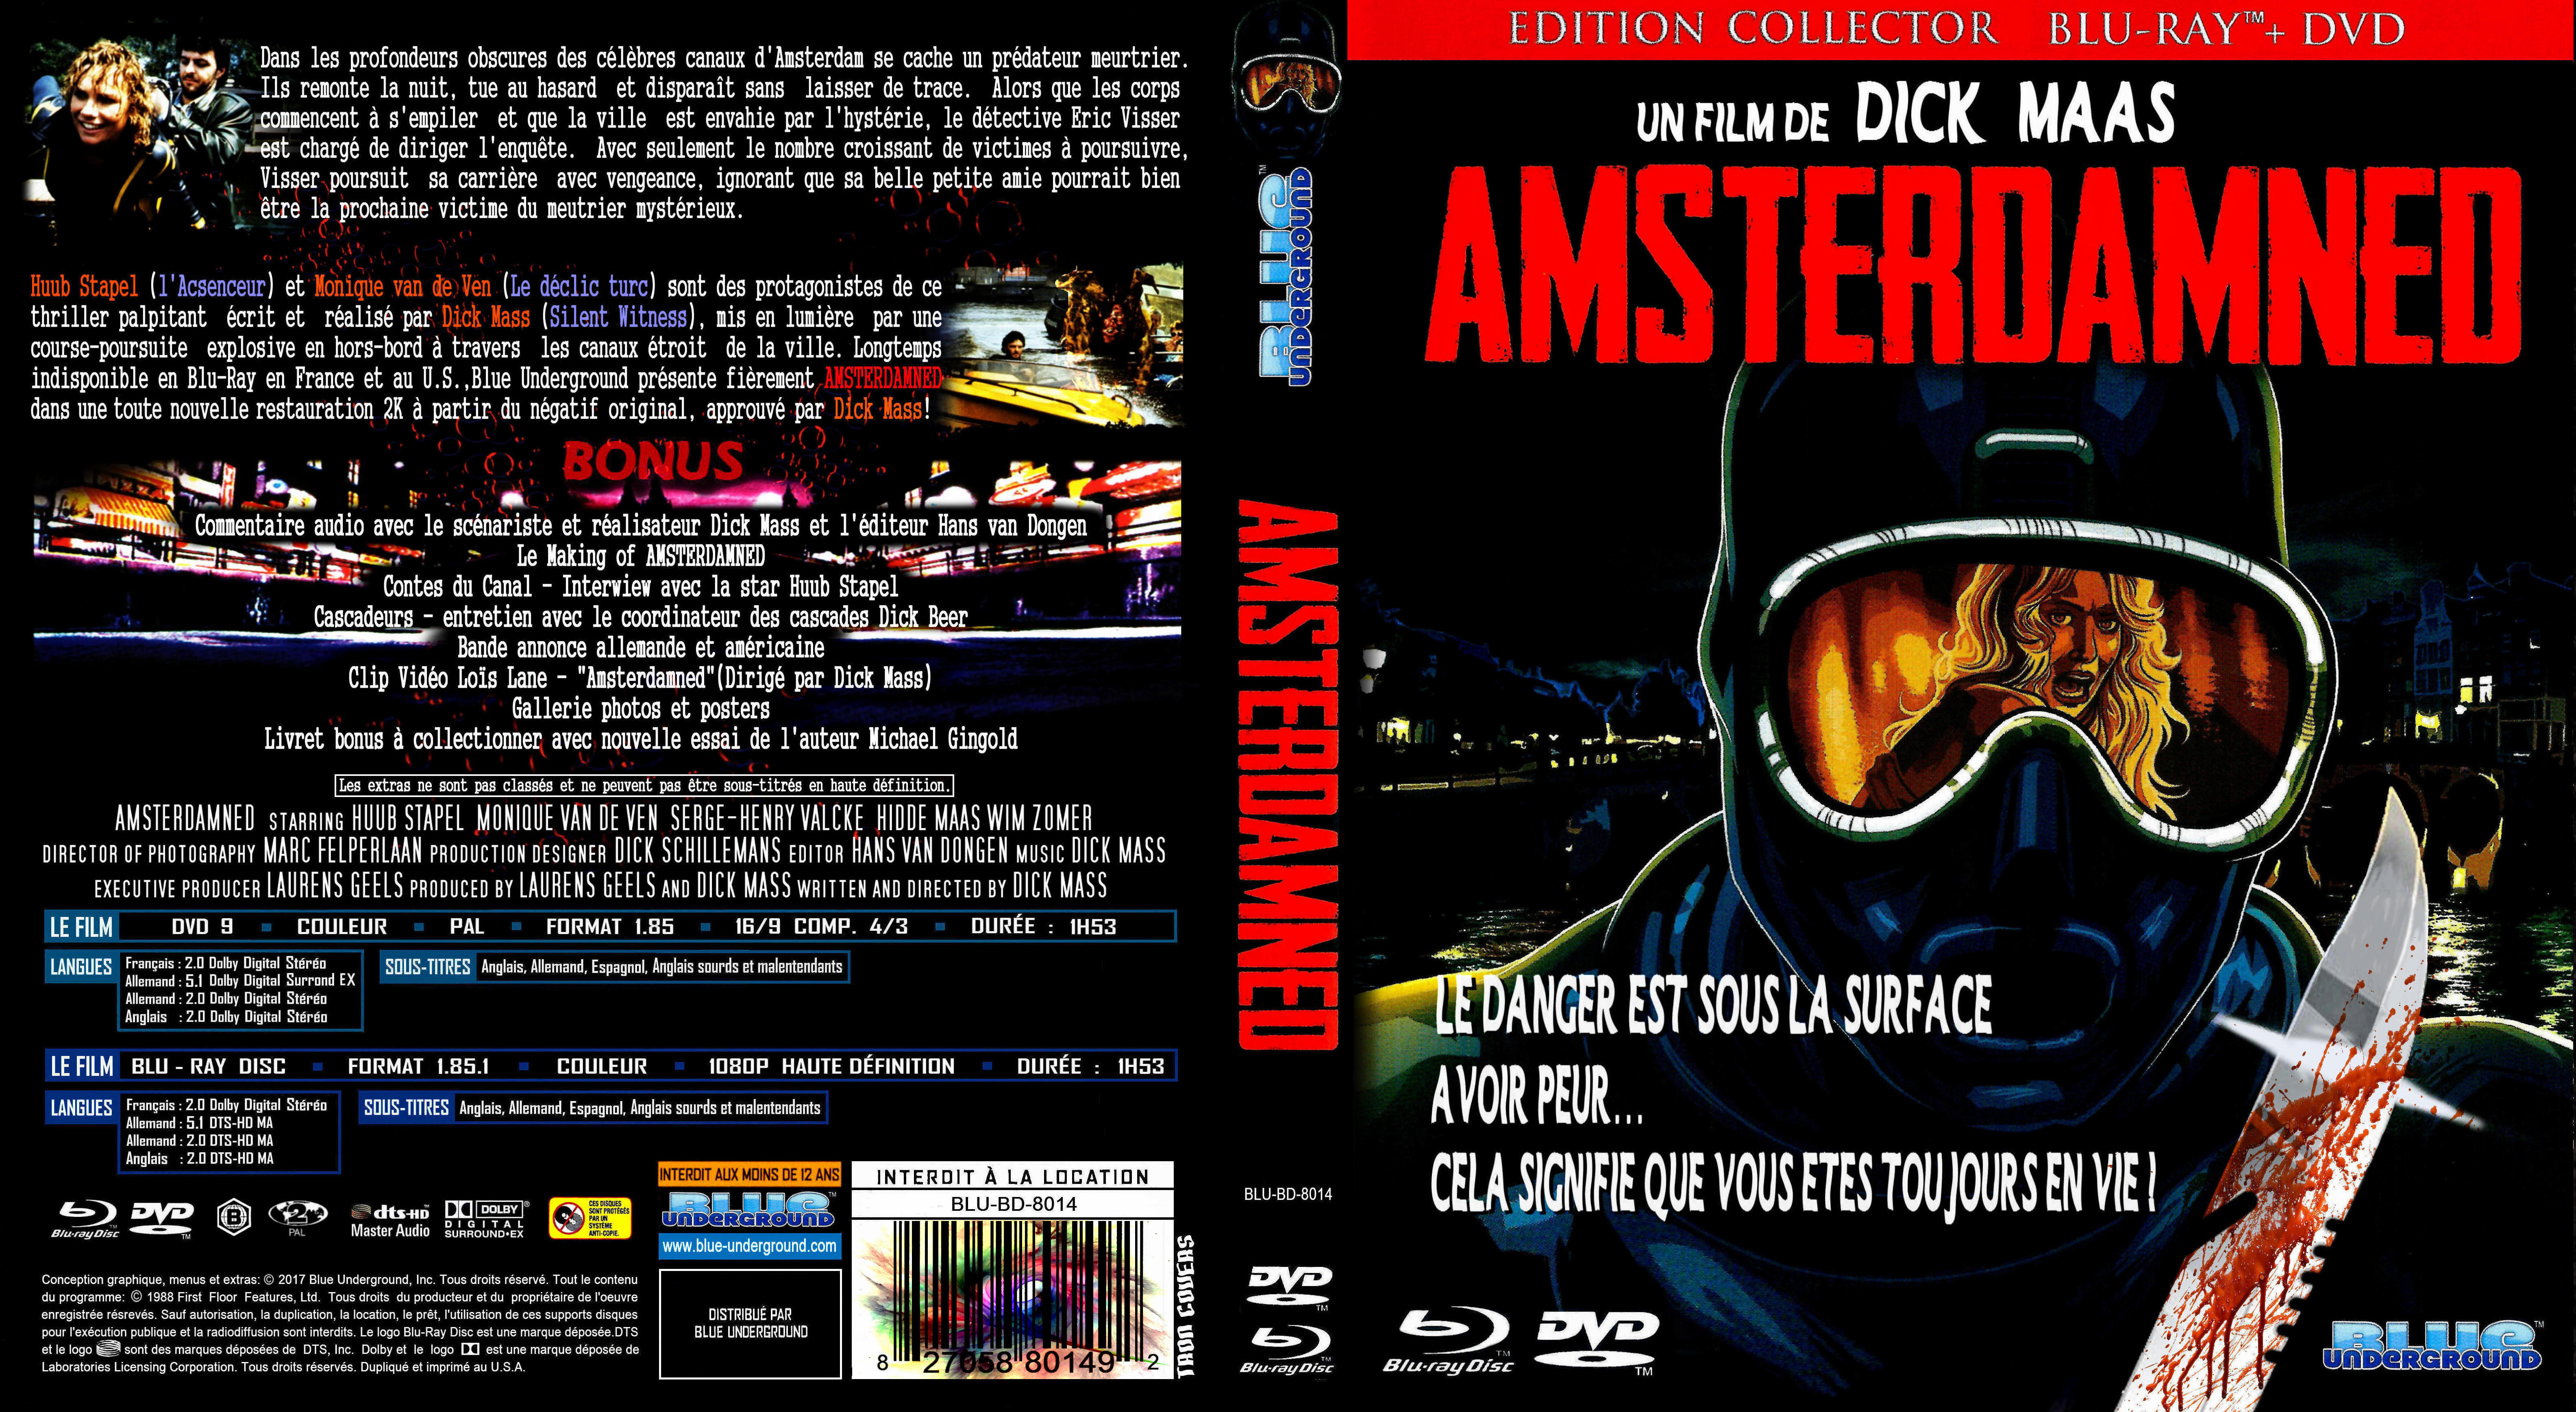 Jaquette DVD Amsterdamned custom (BLU-RAY) 